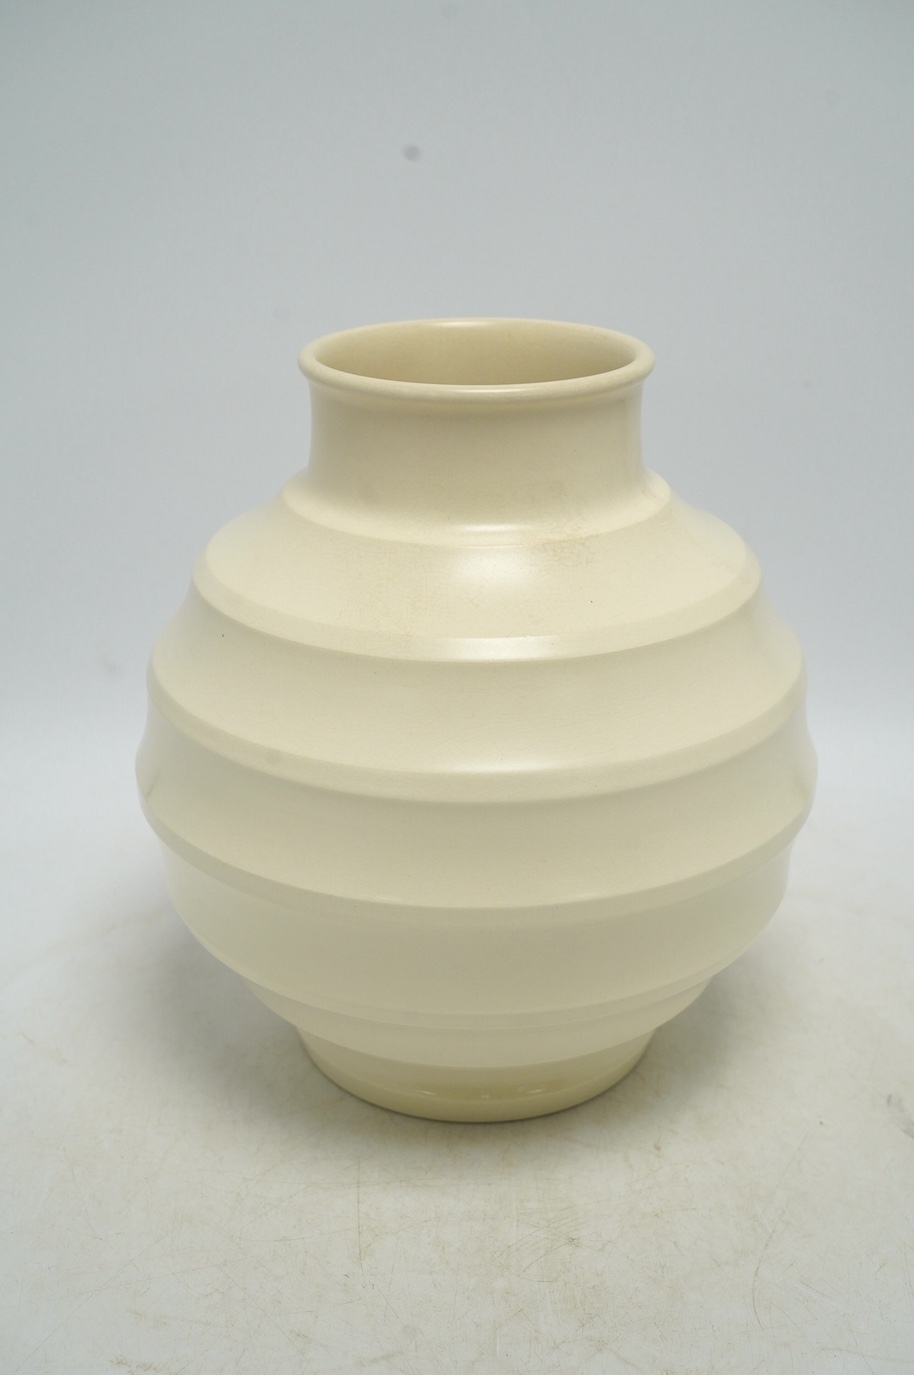 Keith Murray for Wedgwood, a cream glazed ribbed globular vase, 23cm. Condition - fair, star crack visible to base from interior